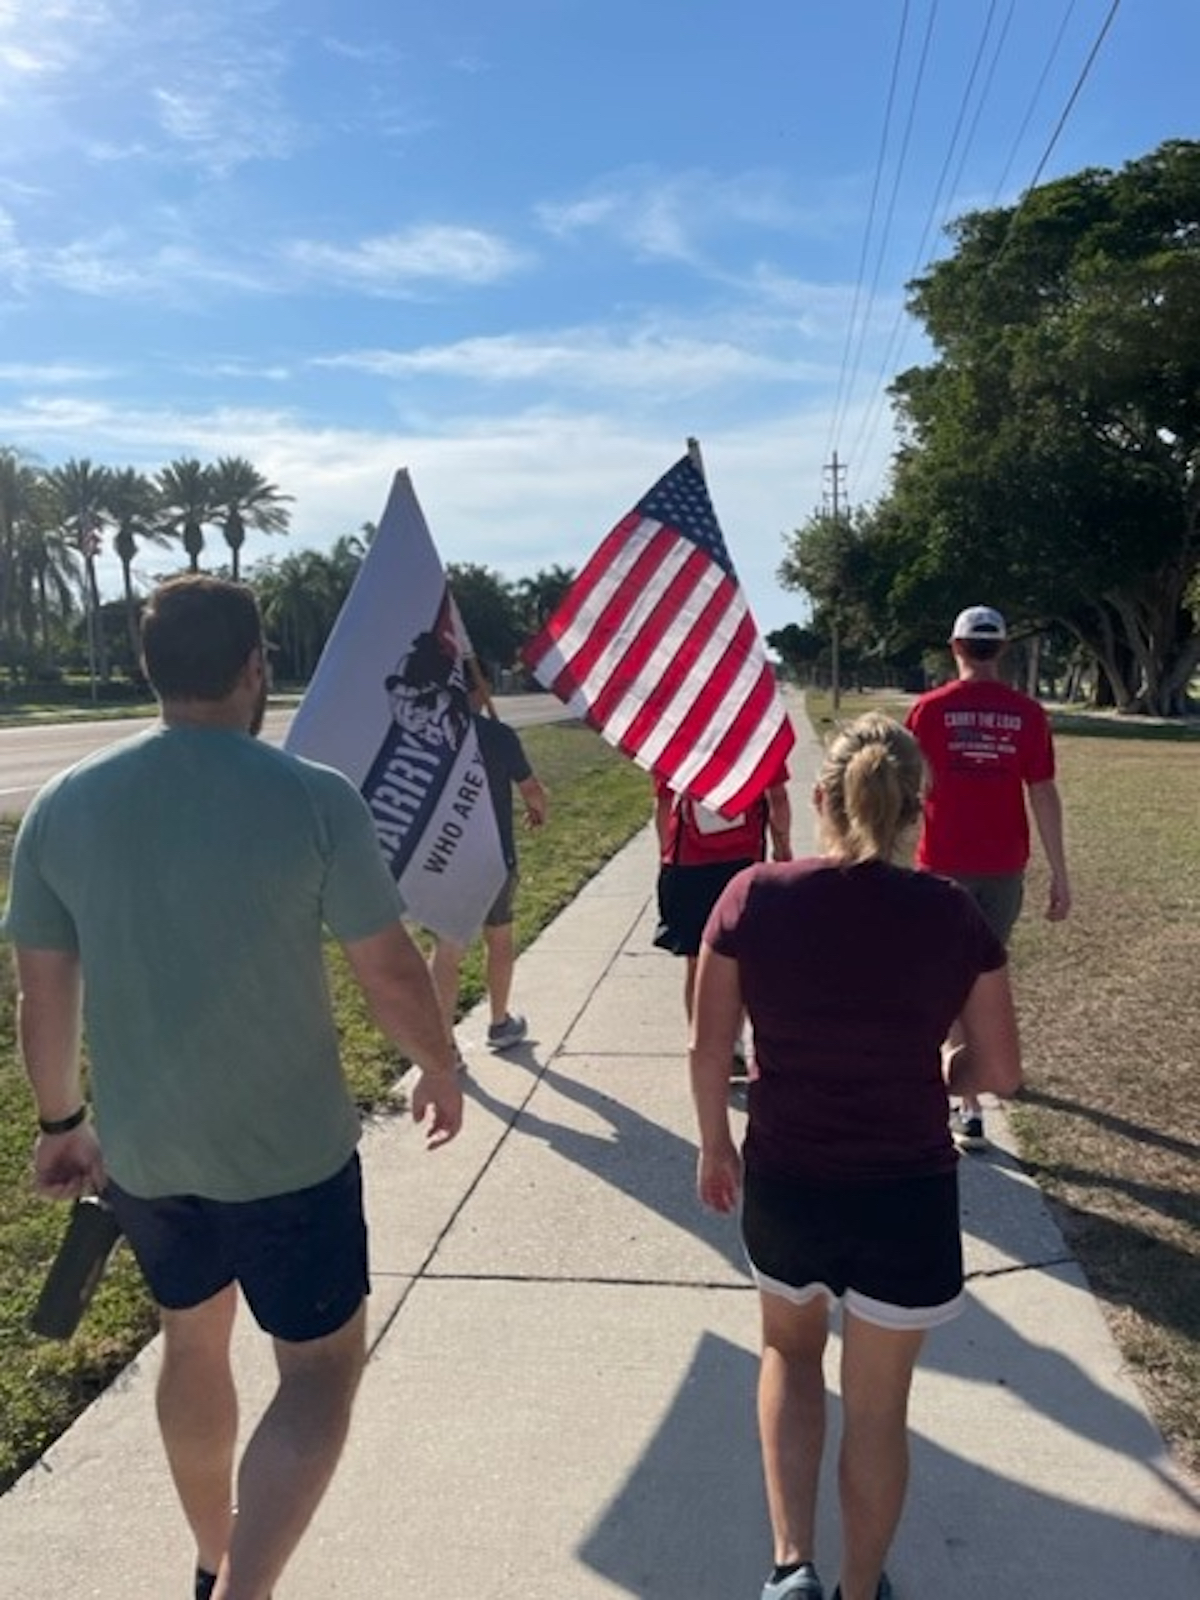 Participants carried flags as they made their way north. Photo courtesy of Tina Adams.